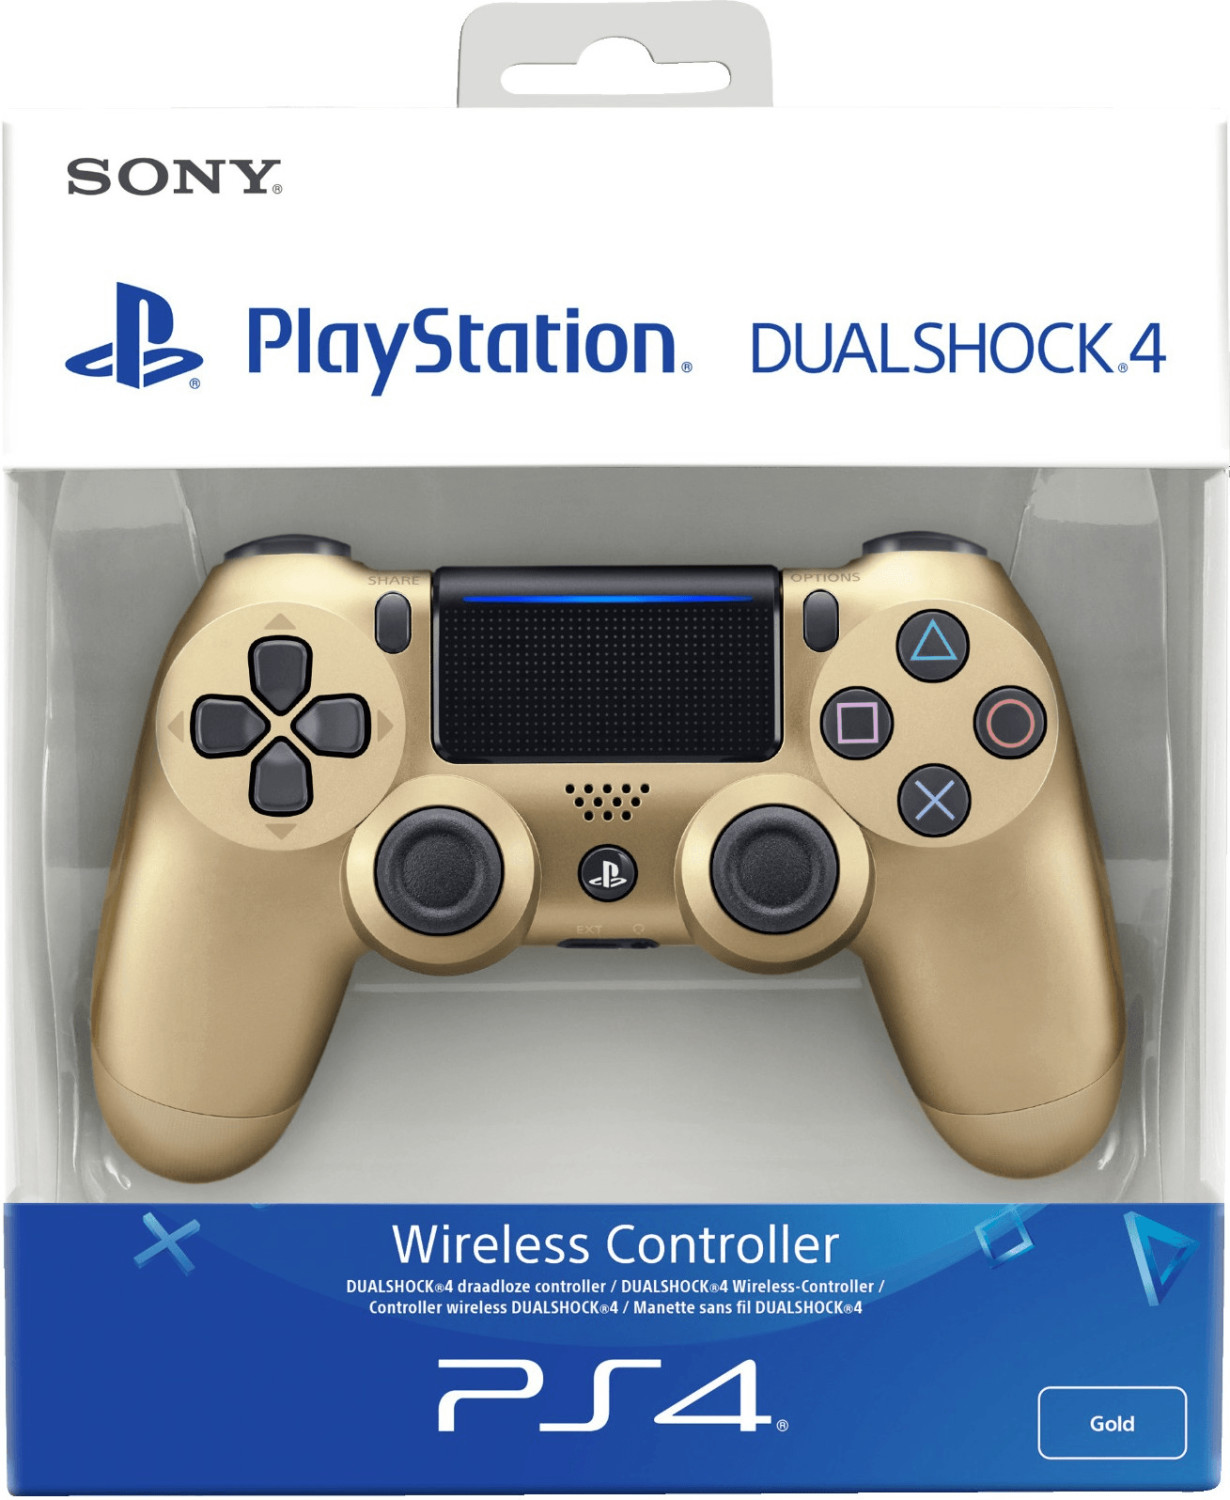 PlayStation 4 DualShock 4 Wireless Controller - PS4 - Gold 